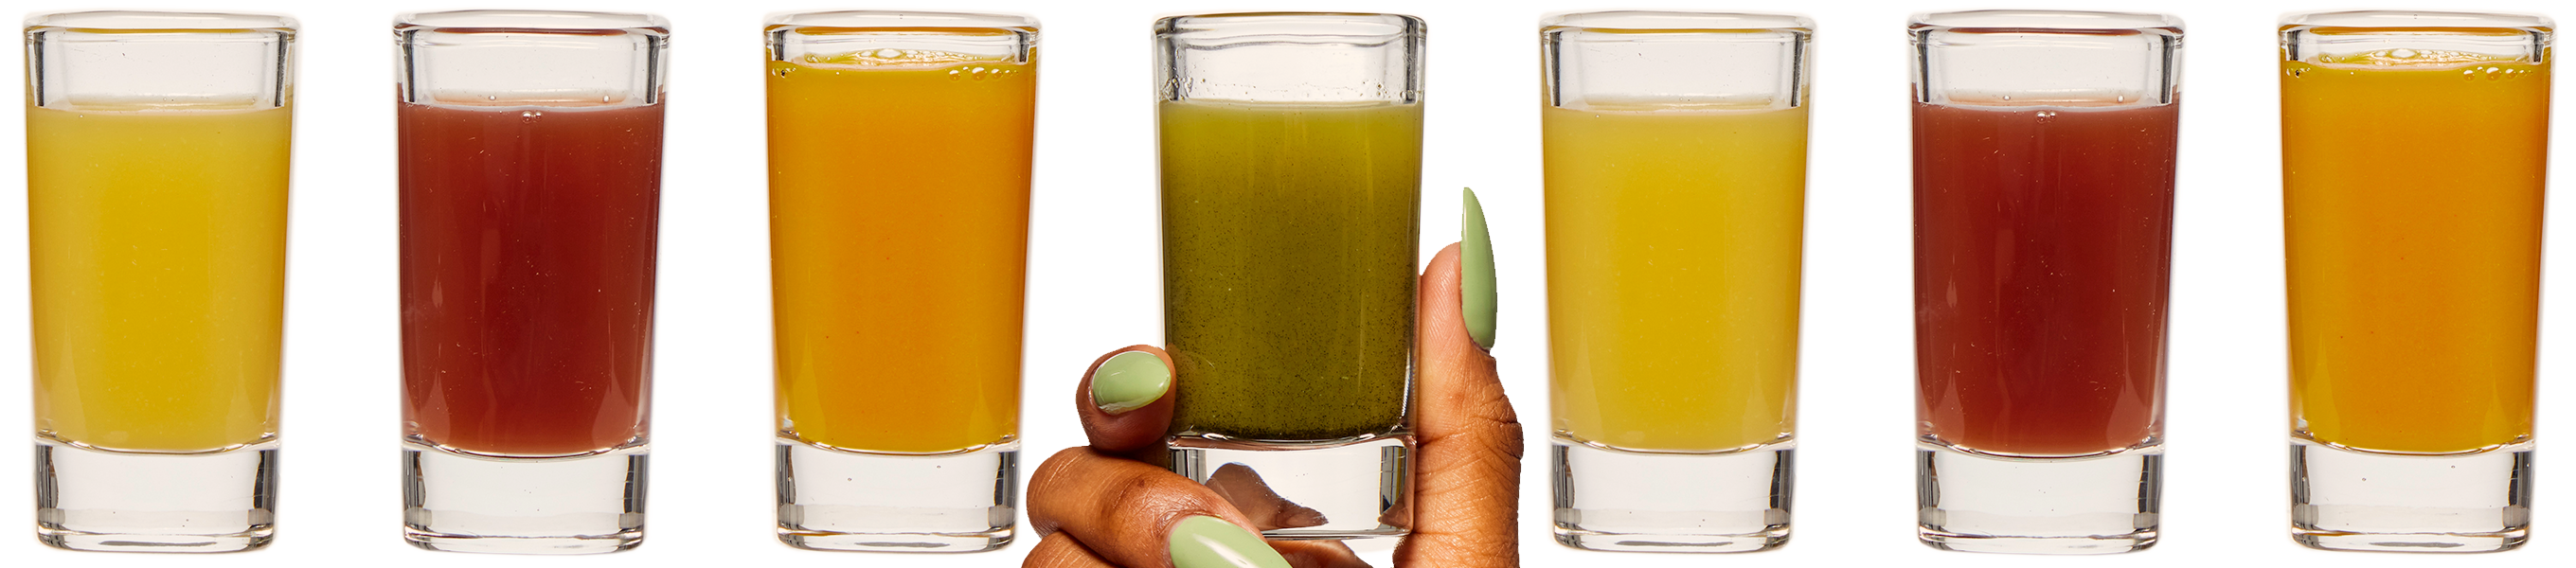 Seven shot glasses filled with colorful juices. The middle one is being held by a human hand emerging from the bottom of the image.